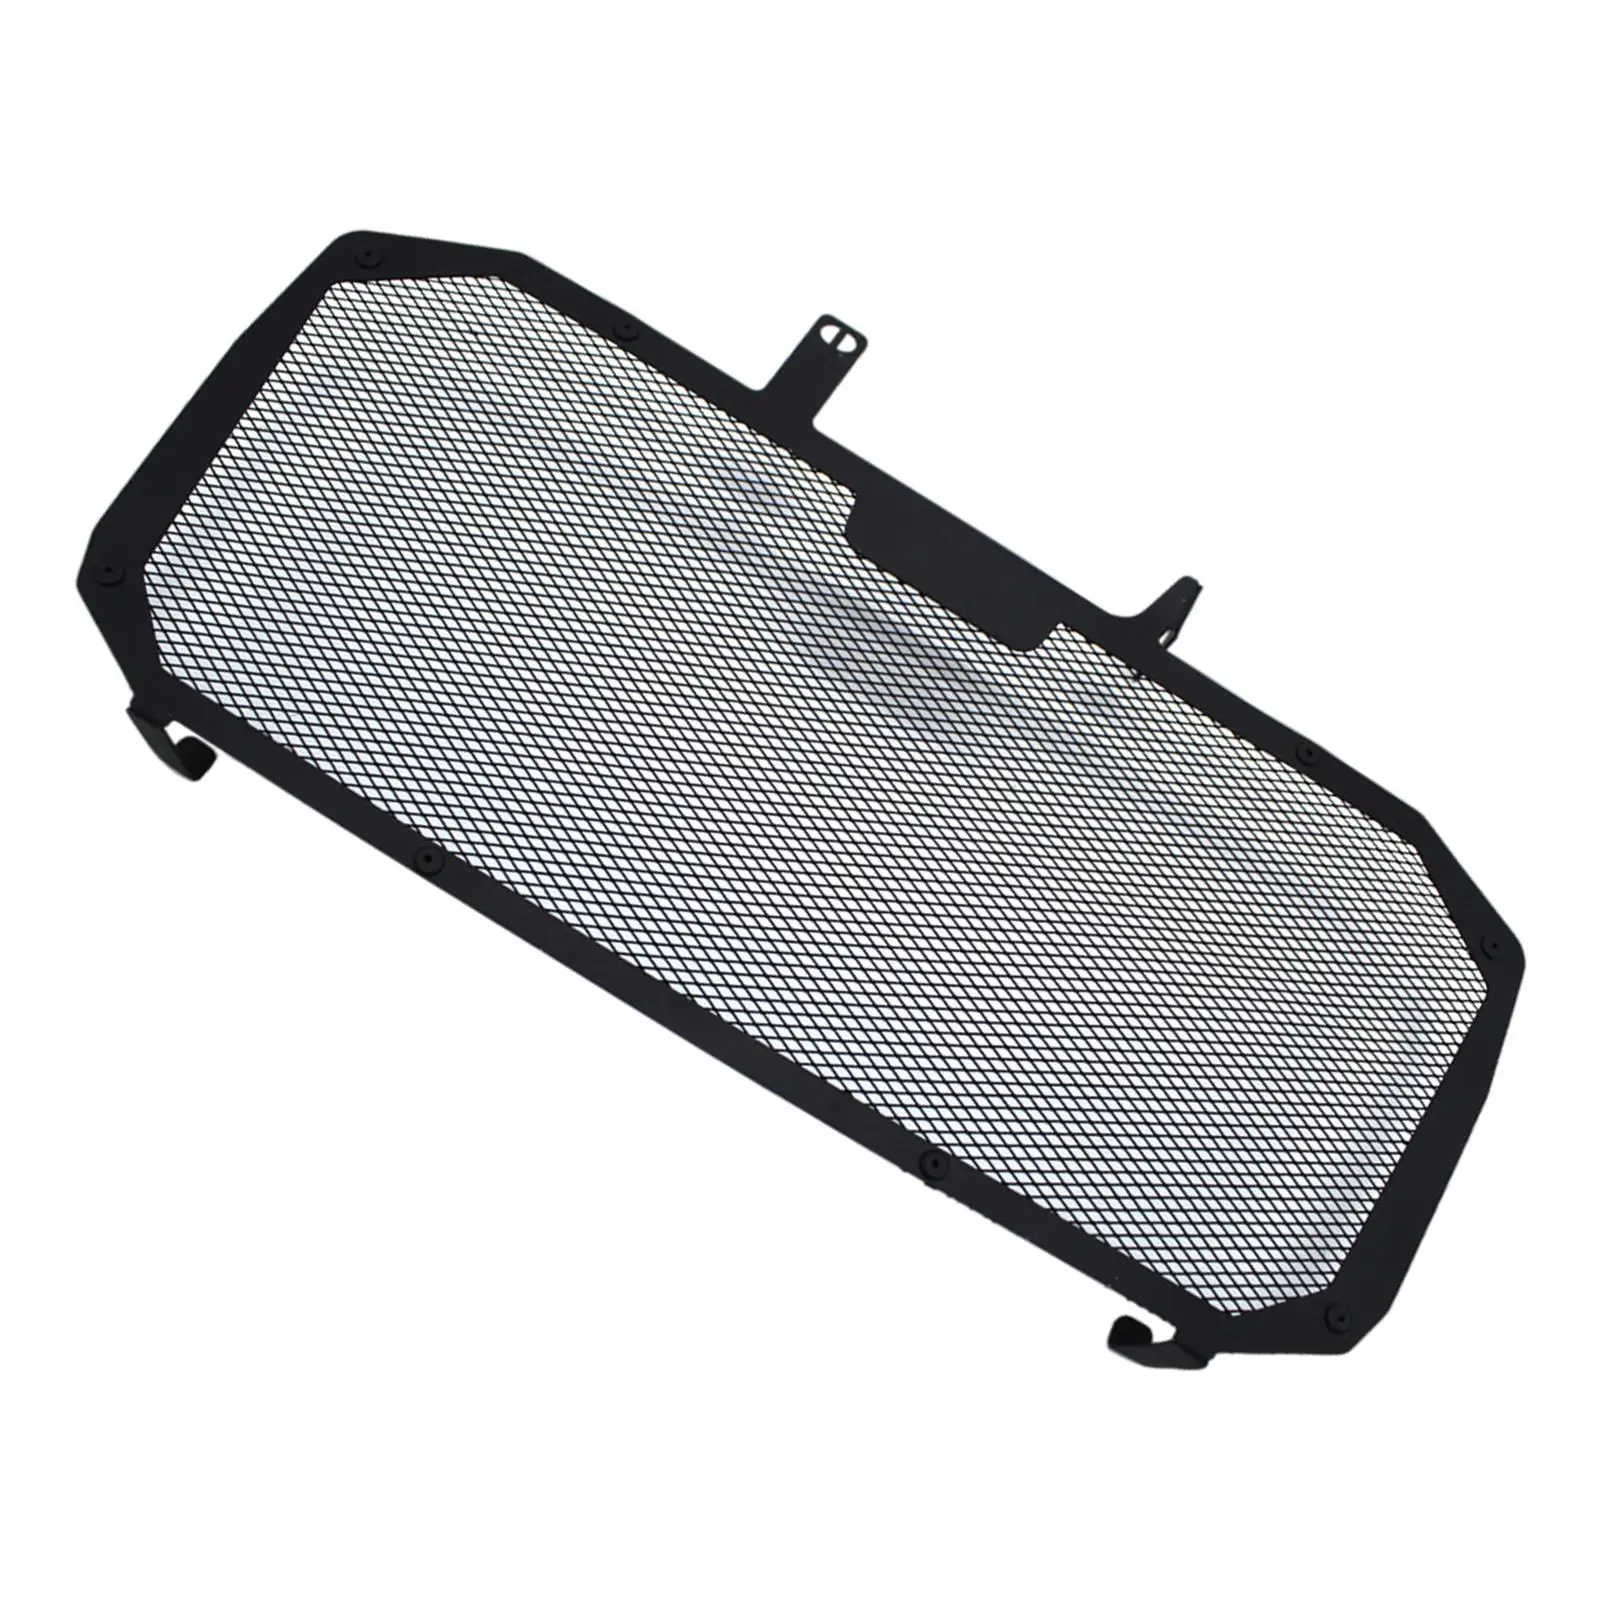 Water Grille Cover for NSS750 50 2020 2021, Durable